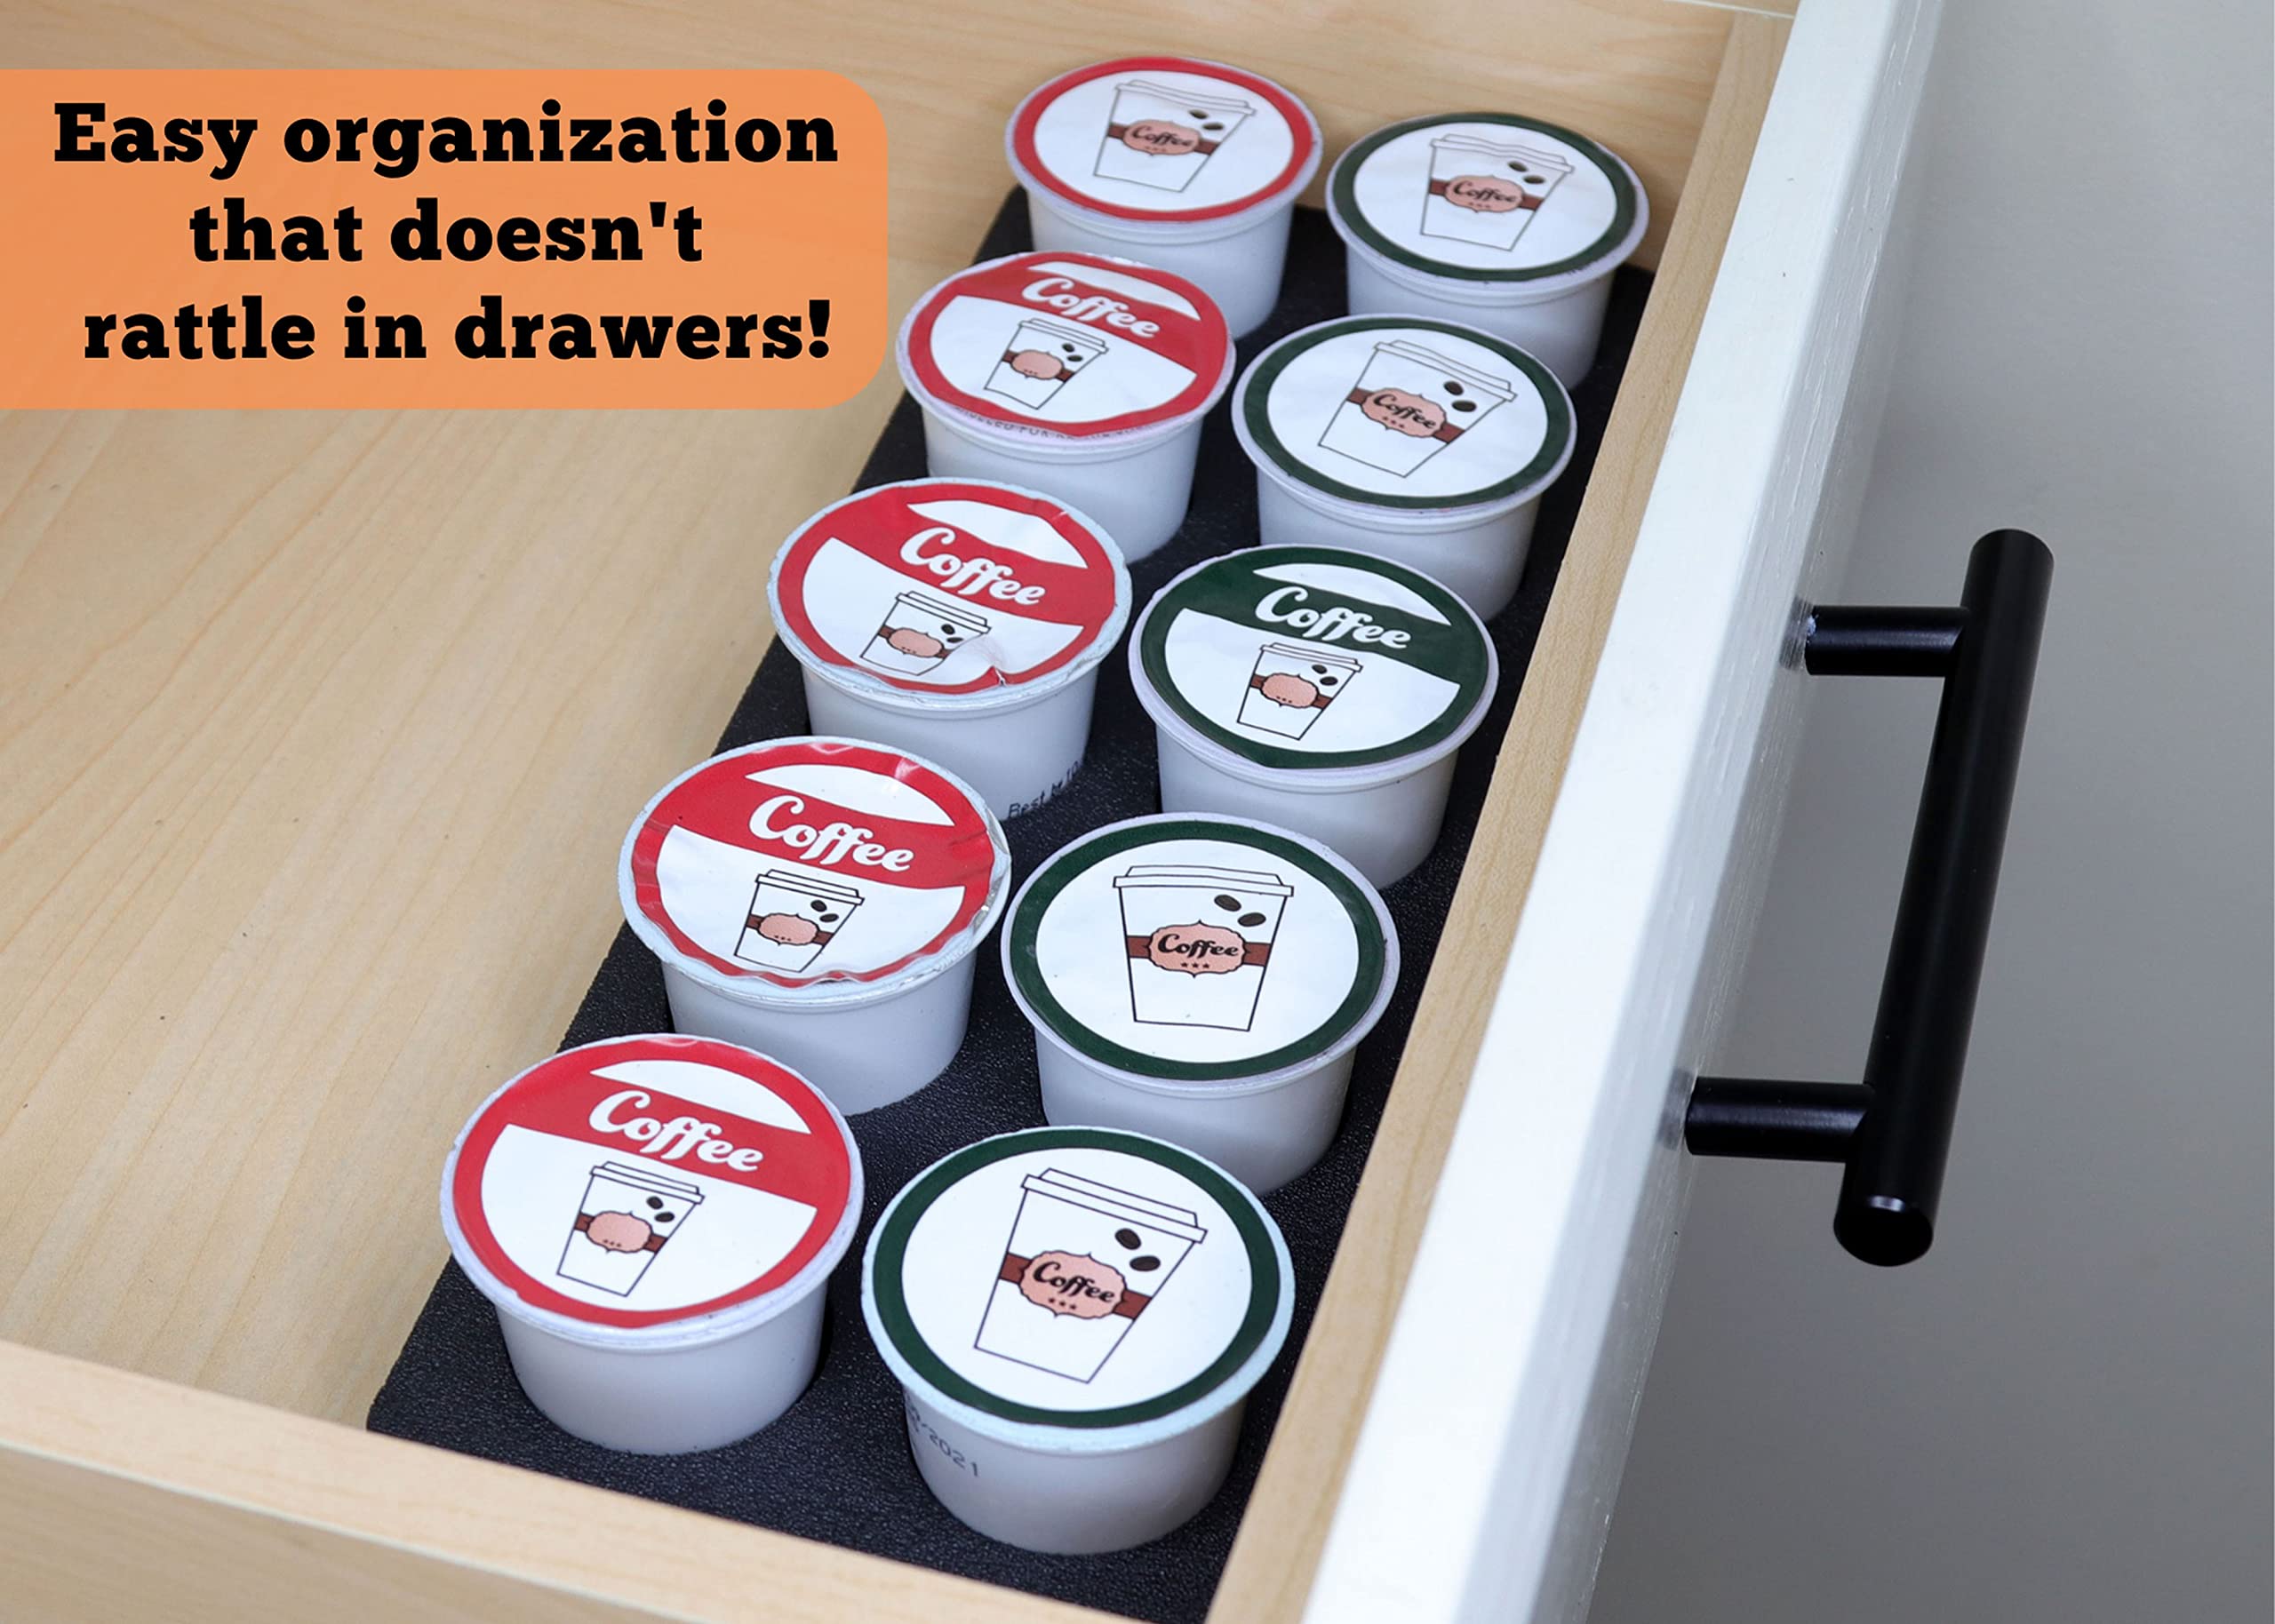 Polar Whale 2 Coffee Pod Storage Organizers Tray Drawer Insert for Kitchen Home Office Waterproof 4.5 X 11.75 Inches Holds 10 Compatible with Keurig K-Cup Made In The USA